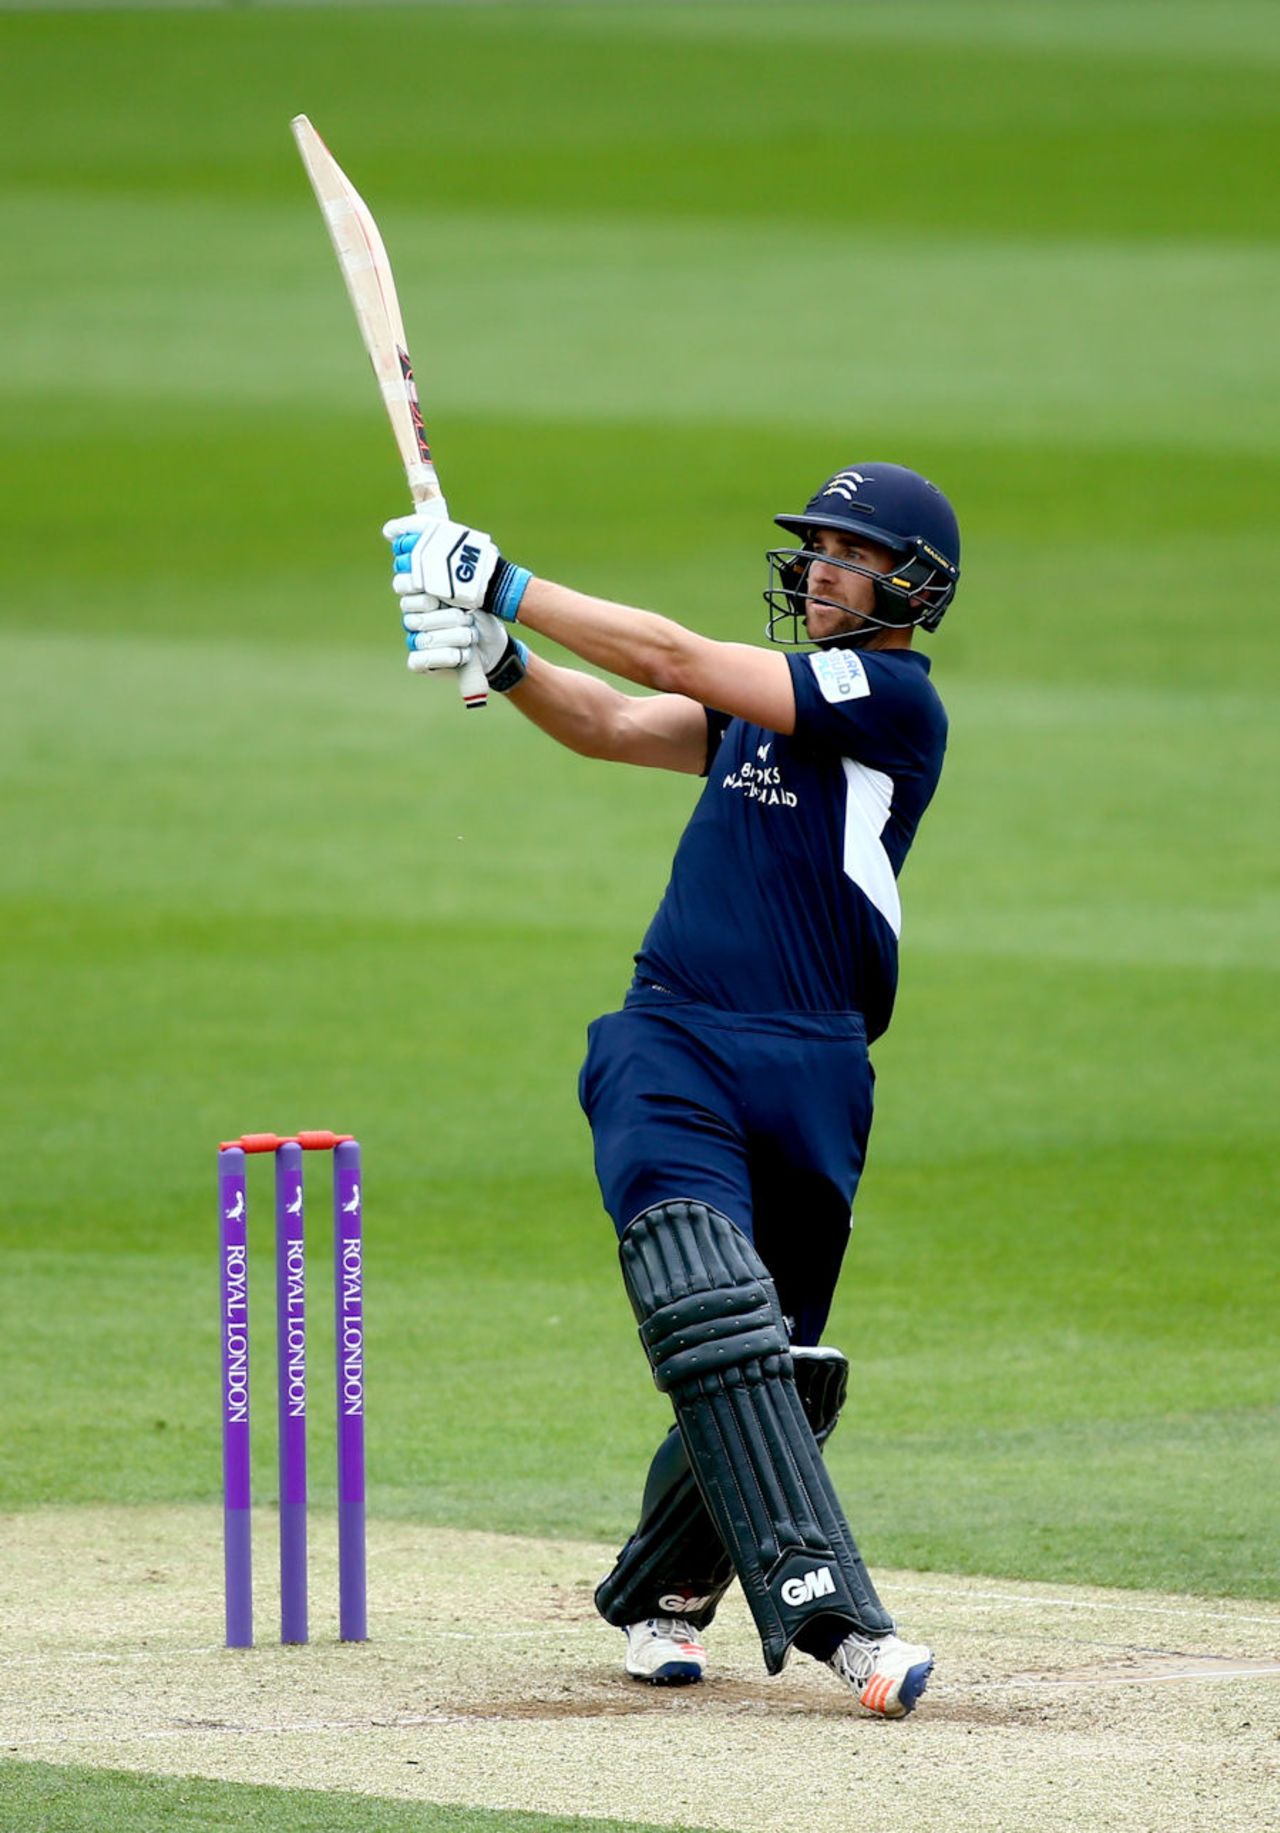 Dawid Malan hits out for Middlesex in the London derby, Surrey v Middlesex, Royal London Cup, South Group, Kia Oval, May 5, 2017